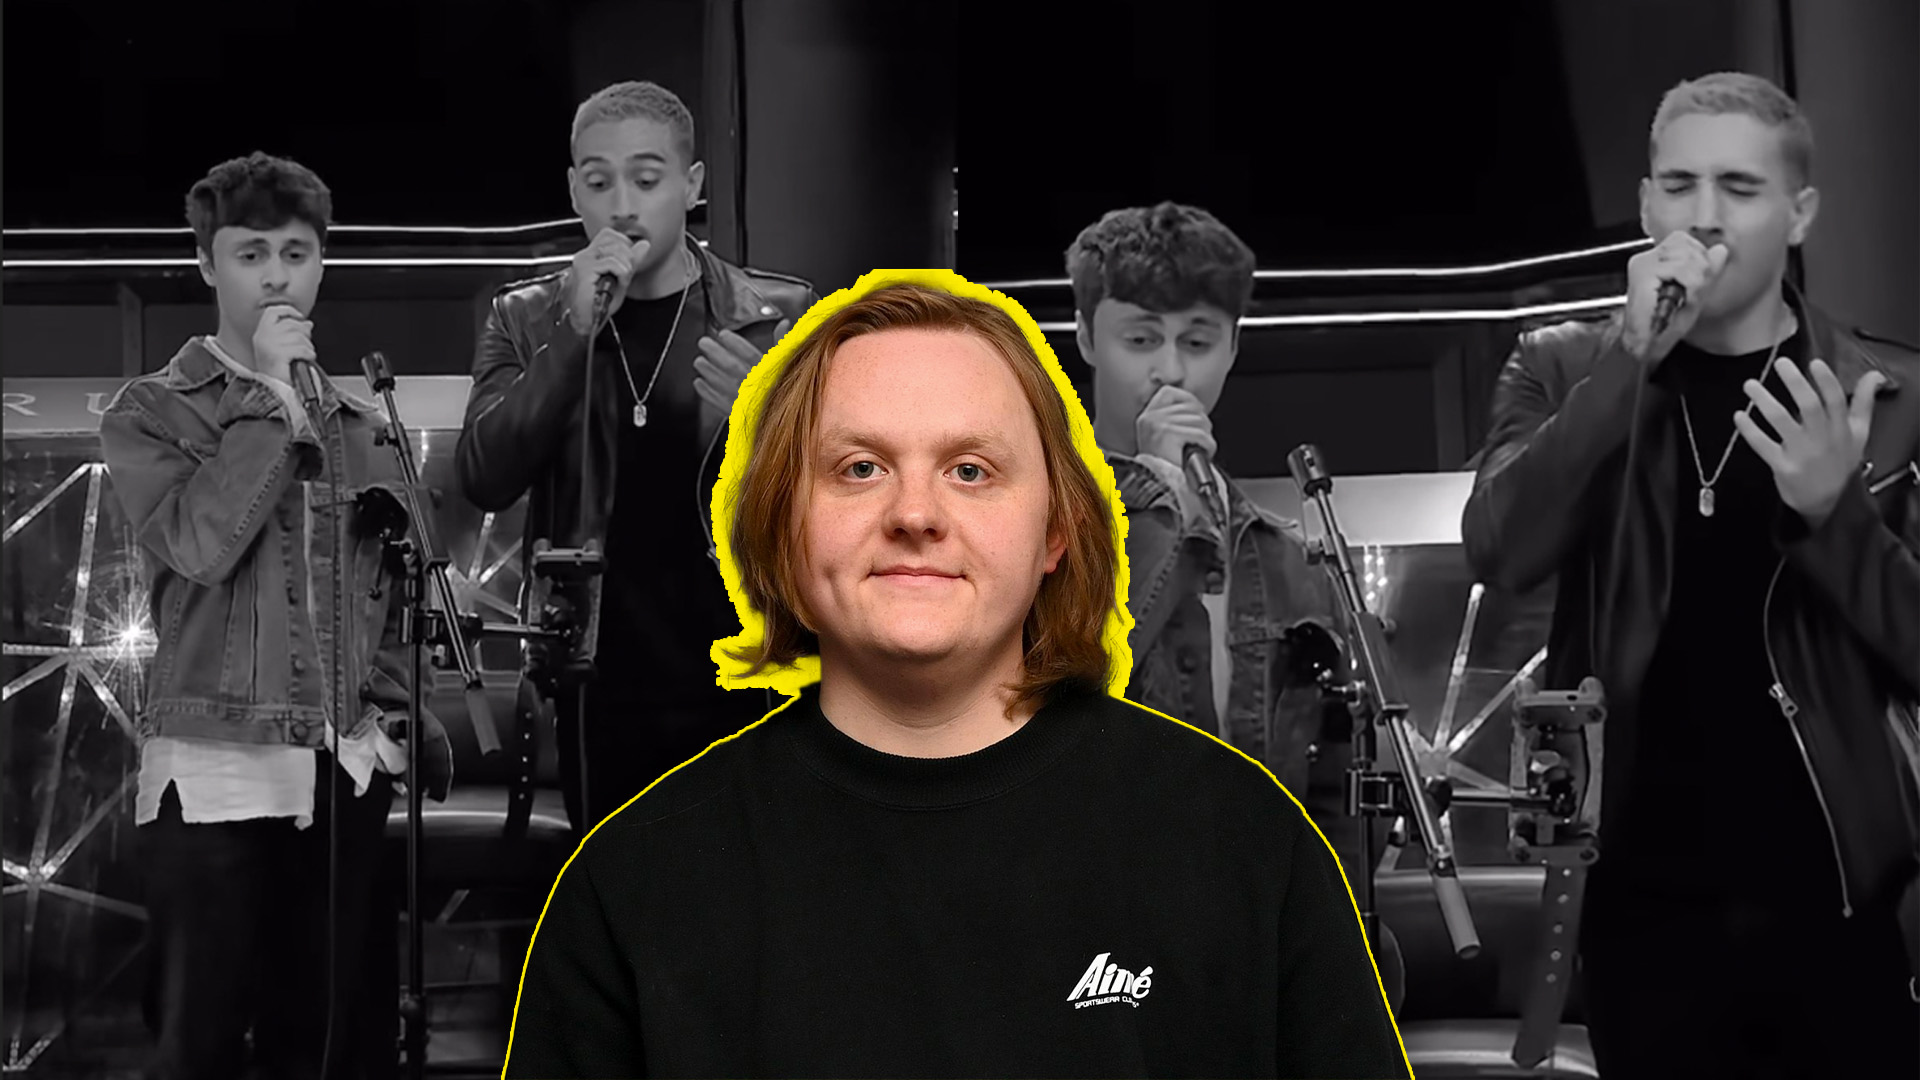 X Factor Winner Richard & Luke Chappell Join Forces for Lewis Capaldi Cover